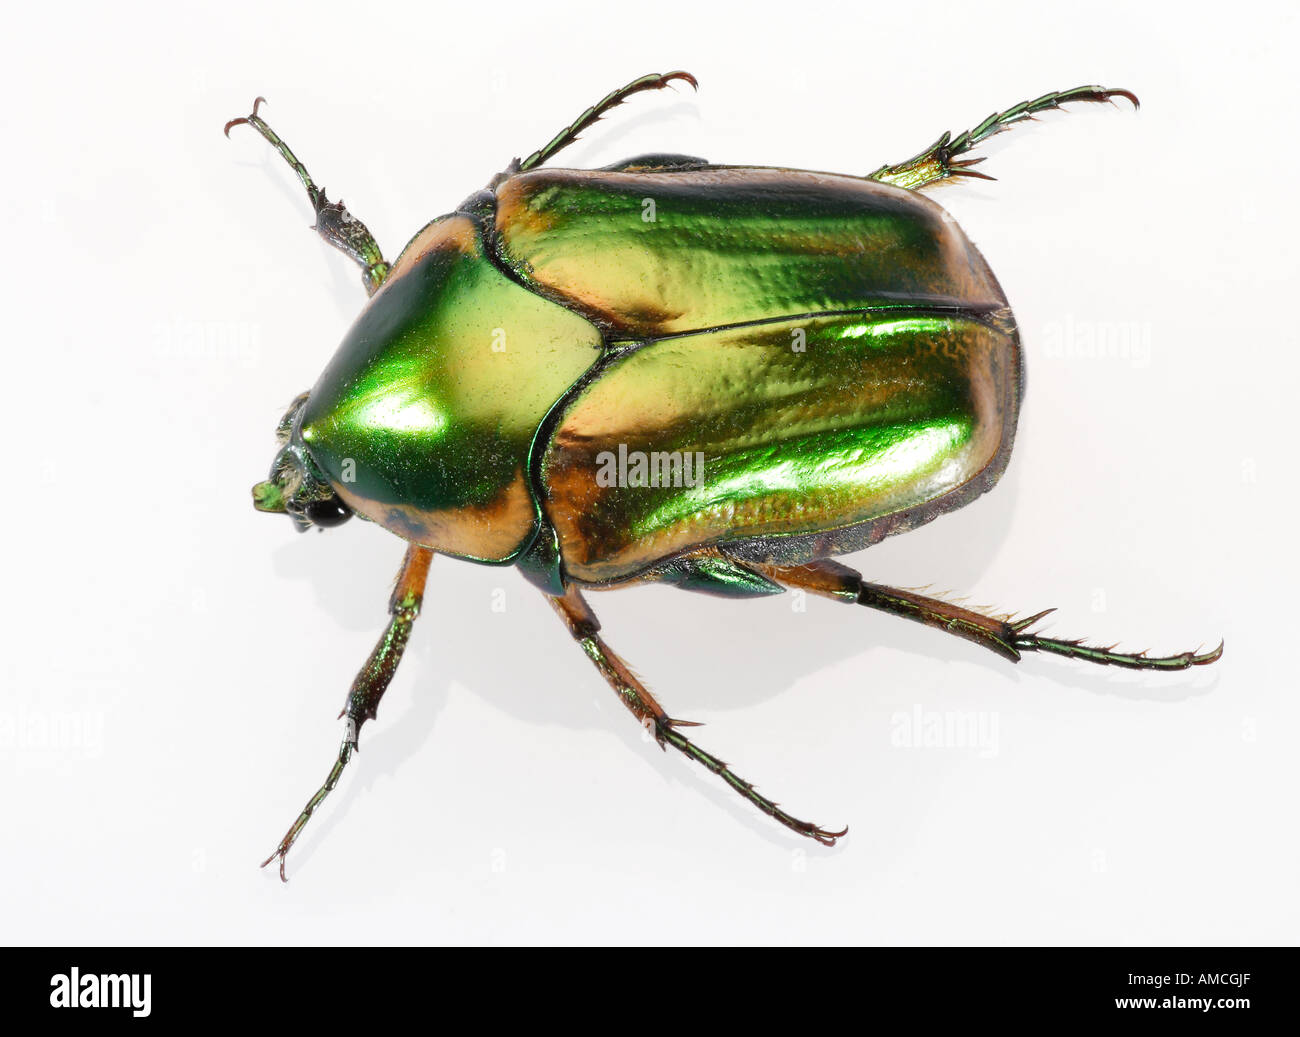 Green June Beetle 3 inches long w Iridescent Carapace also Peach Beetle Stock Photo